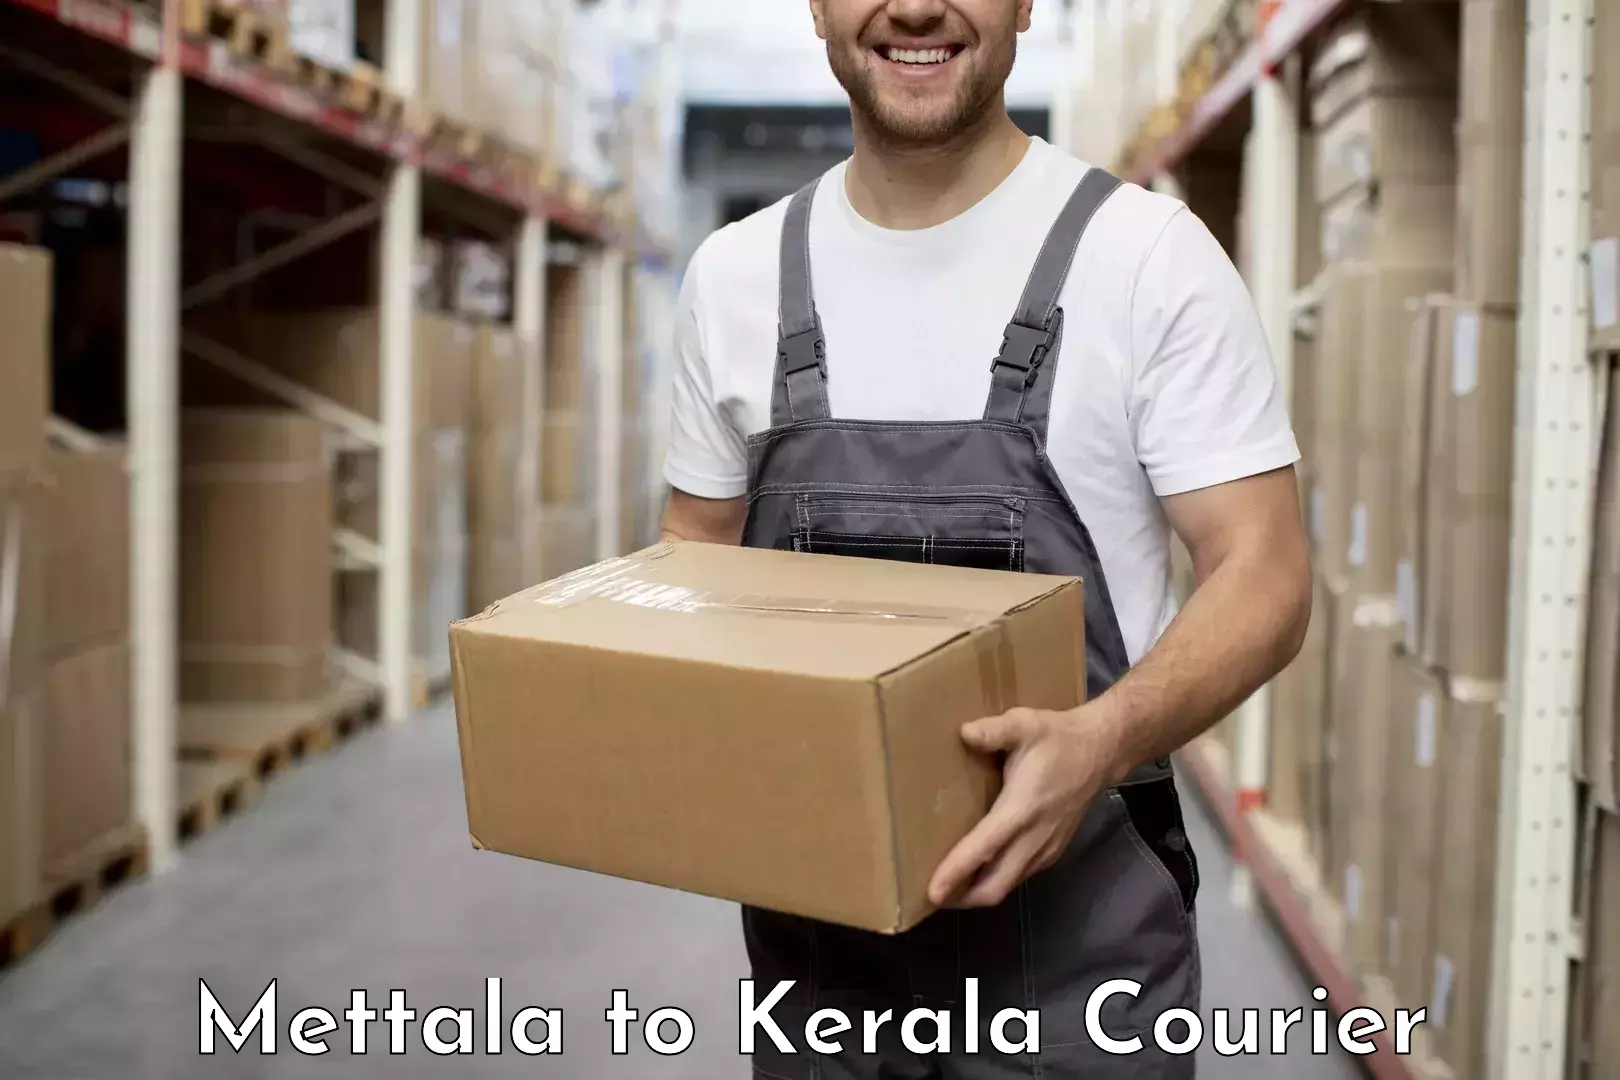 Fast shipping solutions Mettala to Kochi